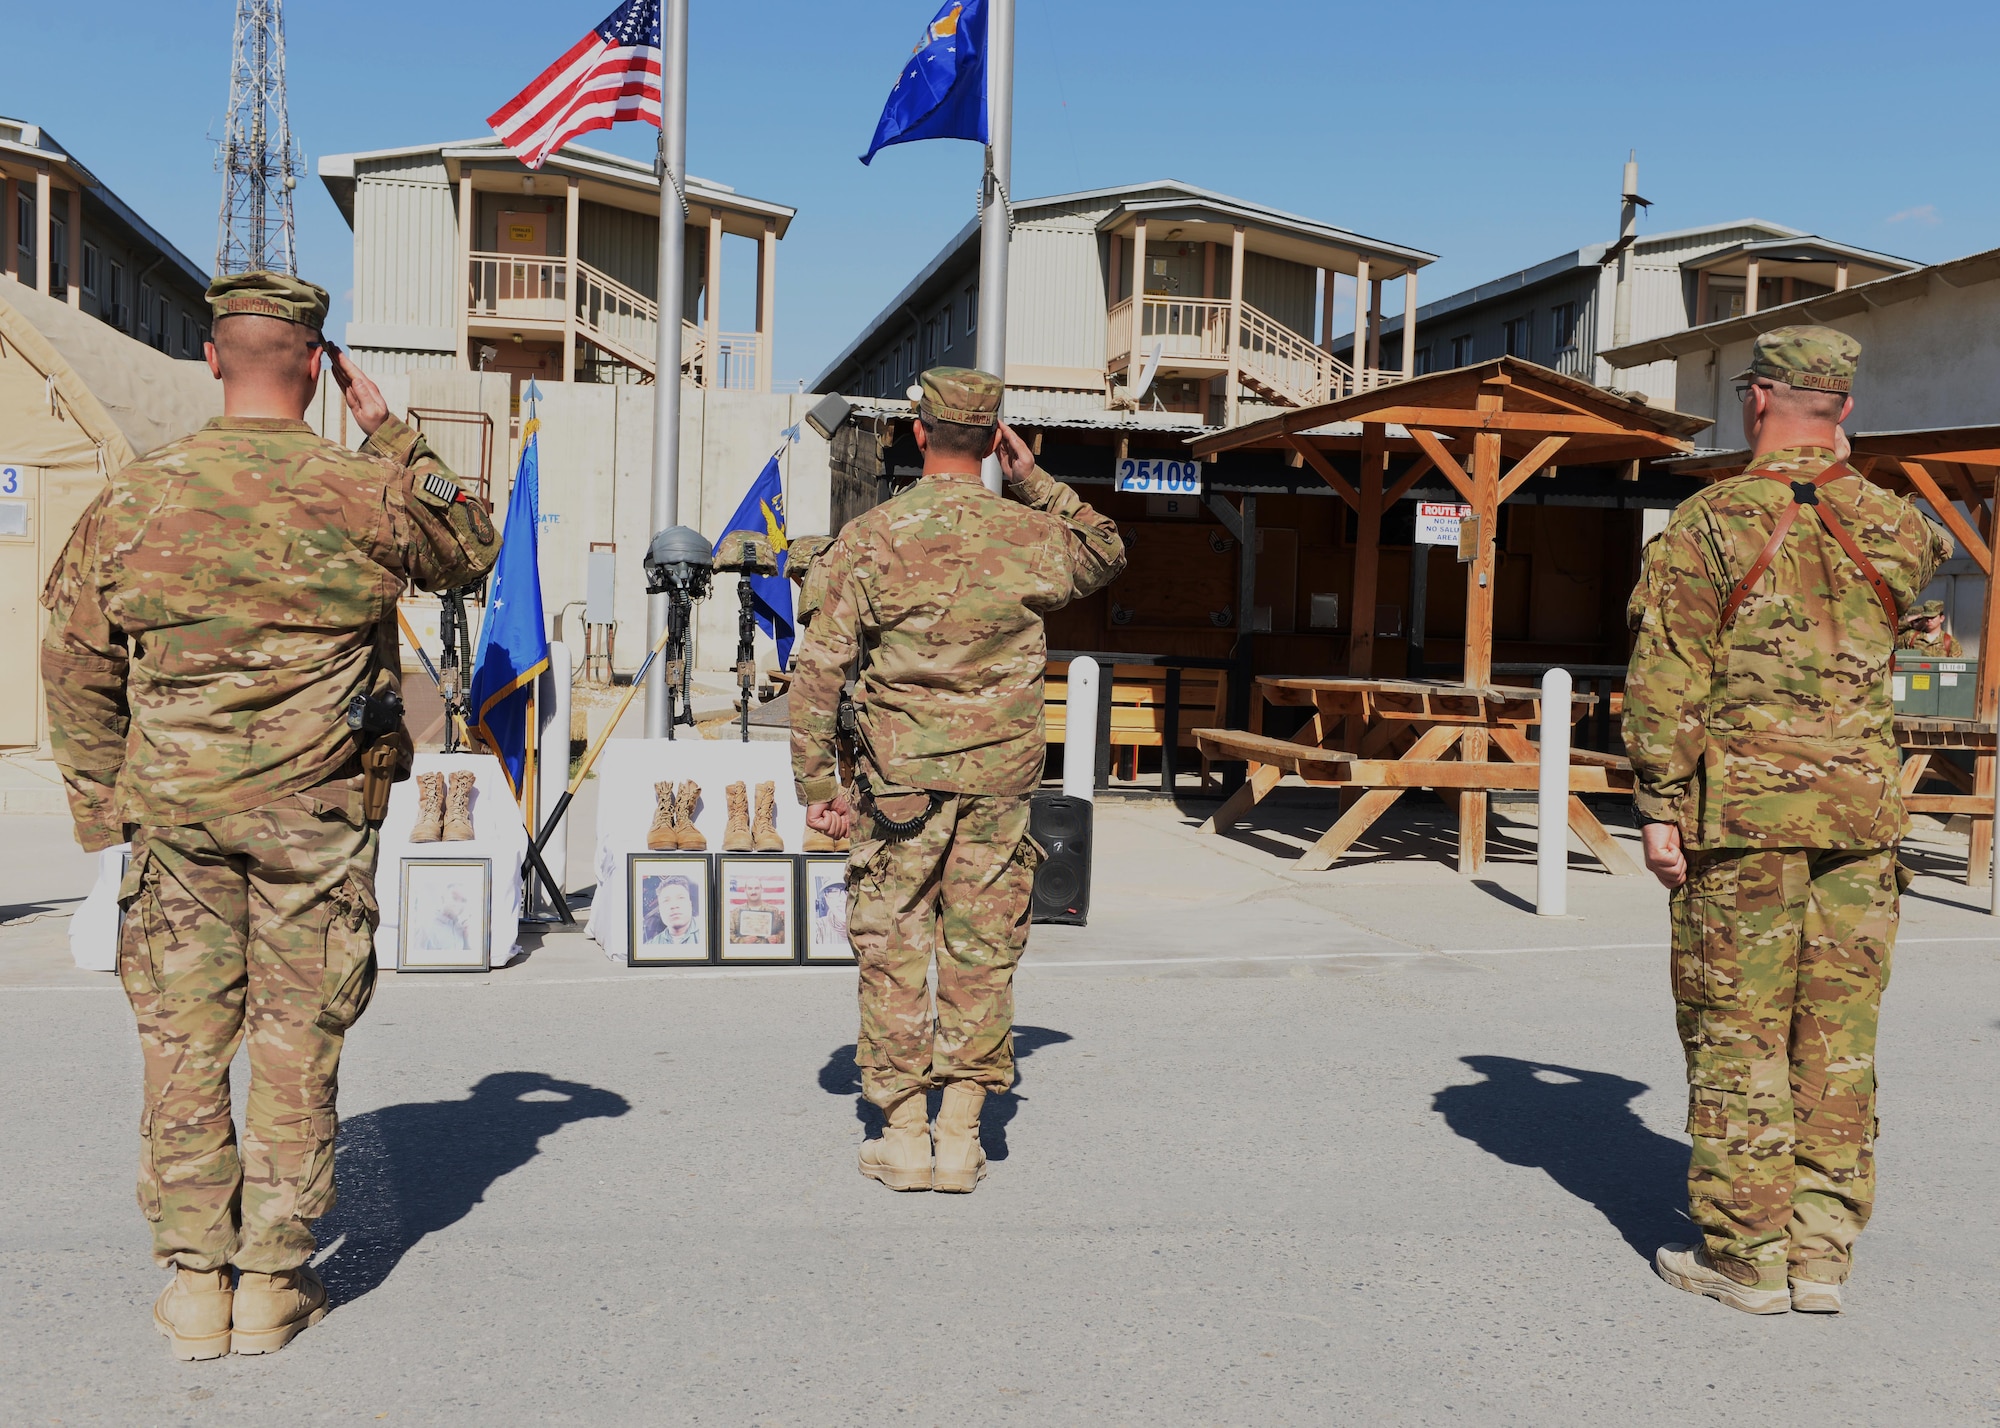 Maj. Met Berisha (left), the 455th Expeditionary Security Forces Squadron commander; Brig. Gen. David Julazadeh (center), the 455th Air Expeditionary Wing commander; and Lt. Col. Mitchell Spillers, the 774th Expeditionary Airlift Squadron commander, salute the memorial of six fallen Airmen during a fallen comrade ceremony Oct. 3, 2015, at Bagram Airfield, Afghanistan. Six Airmen lost their lives when their C-130J Super Hercules crashed shortly after takeoff from Jalalabad Airfield in Afghanistan, Oct. 2, 2015. Capts. Jordan Pierson and Jonathan Golden, Staff Sgt. Ryan Hammond and Senior Airman Quinn Johnson-Harris were pilots and crew members. Airman 1st Class Kcey Ruiz and Senior Airman Nathan Sartain were security forces fly away security team members. (U.S. Air Force photo/Senior Airman Cierra Presentado)